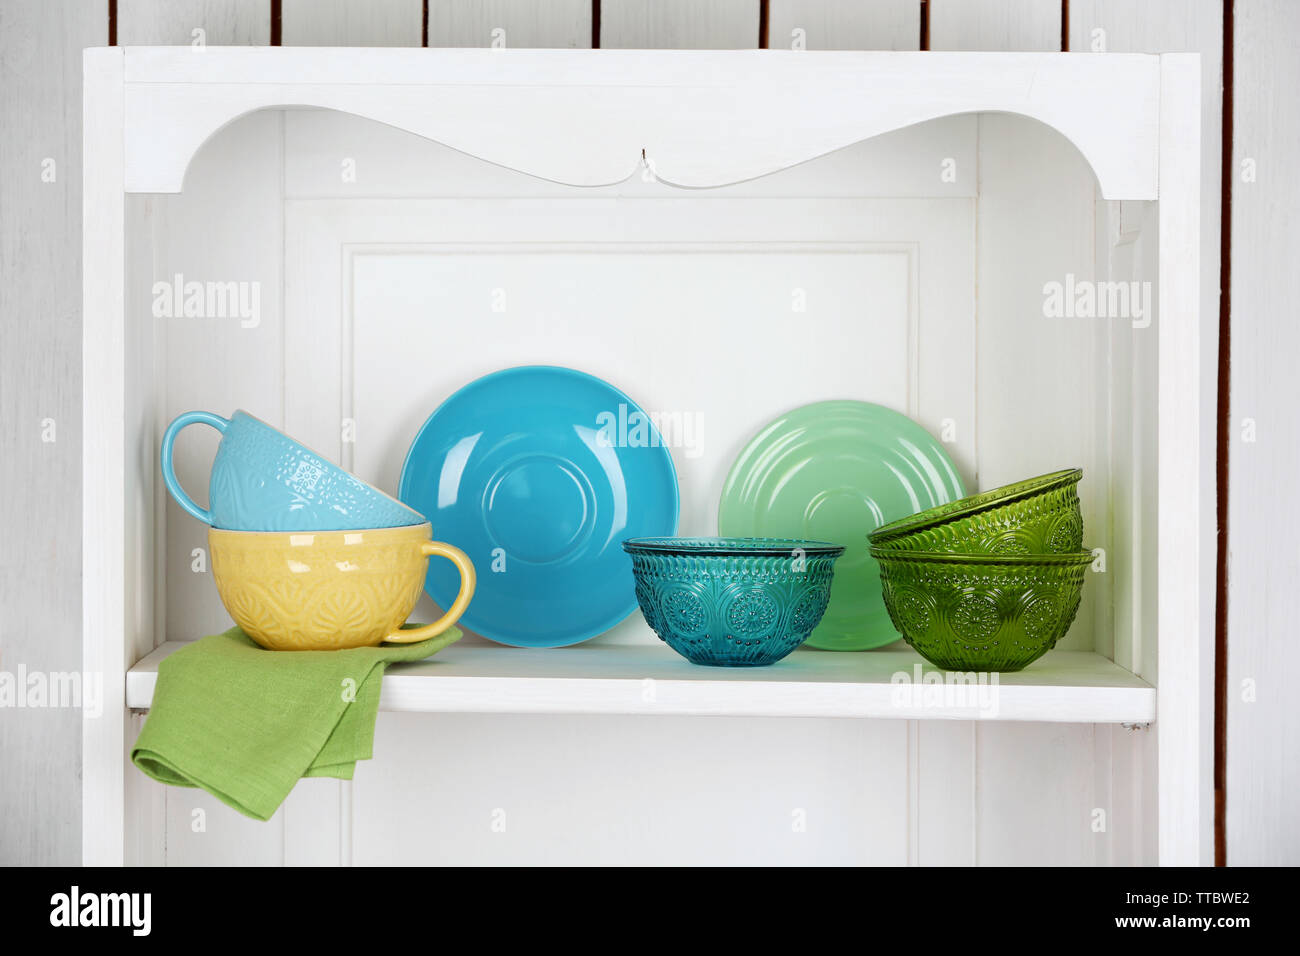 White kitchen cupboard with glasses, cups and bowls. Pastelles Stock Photo  - Alamy